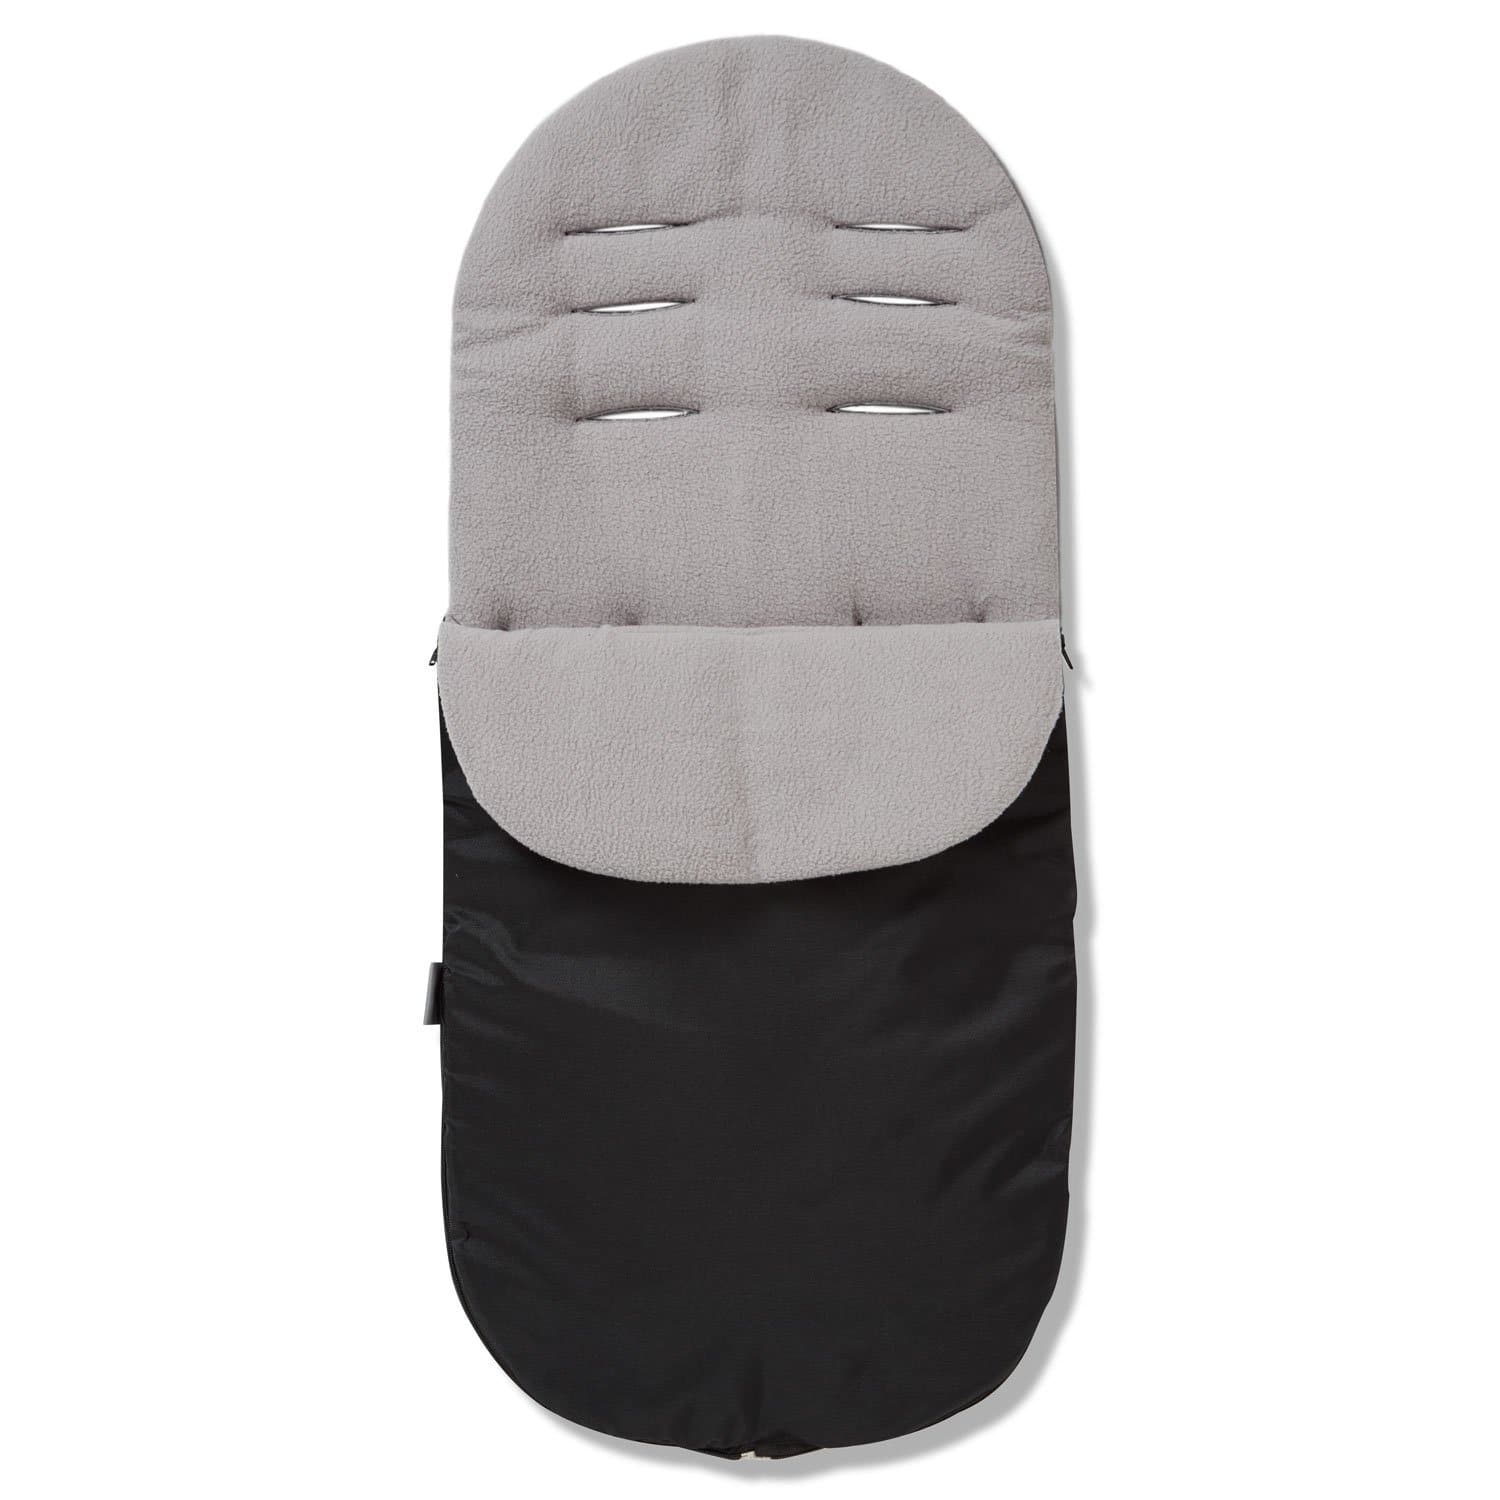 Footmuff / Cosy Toes Compatible with Phil & Teds - Grey / Fits All Models | For Your Little One